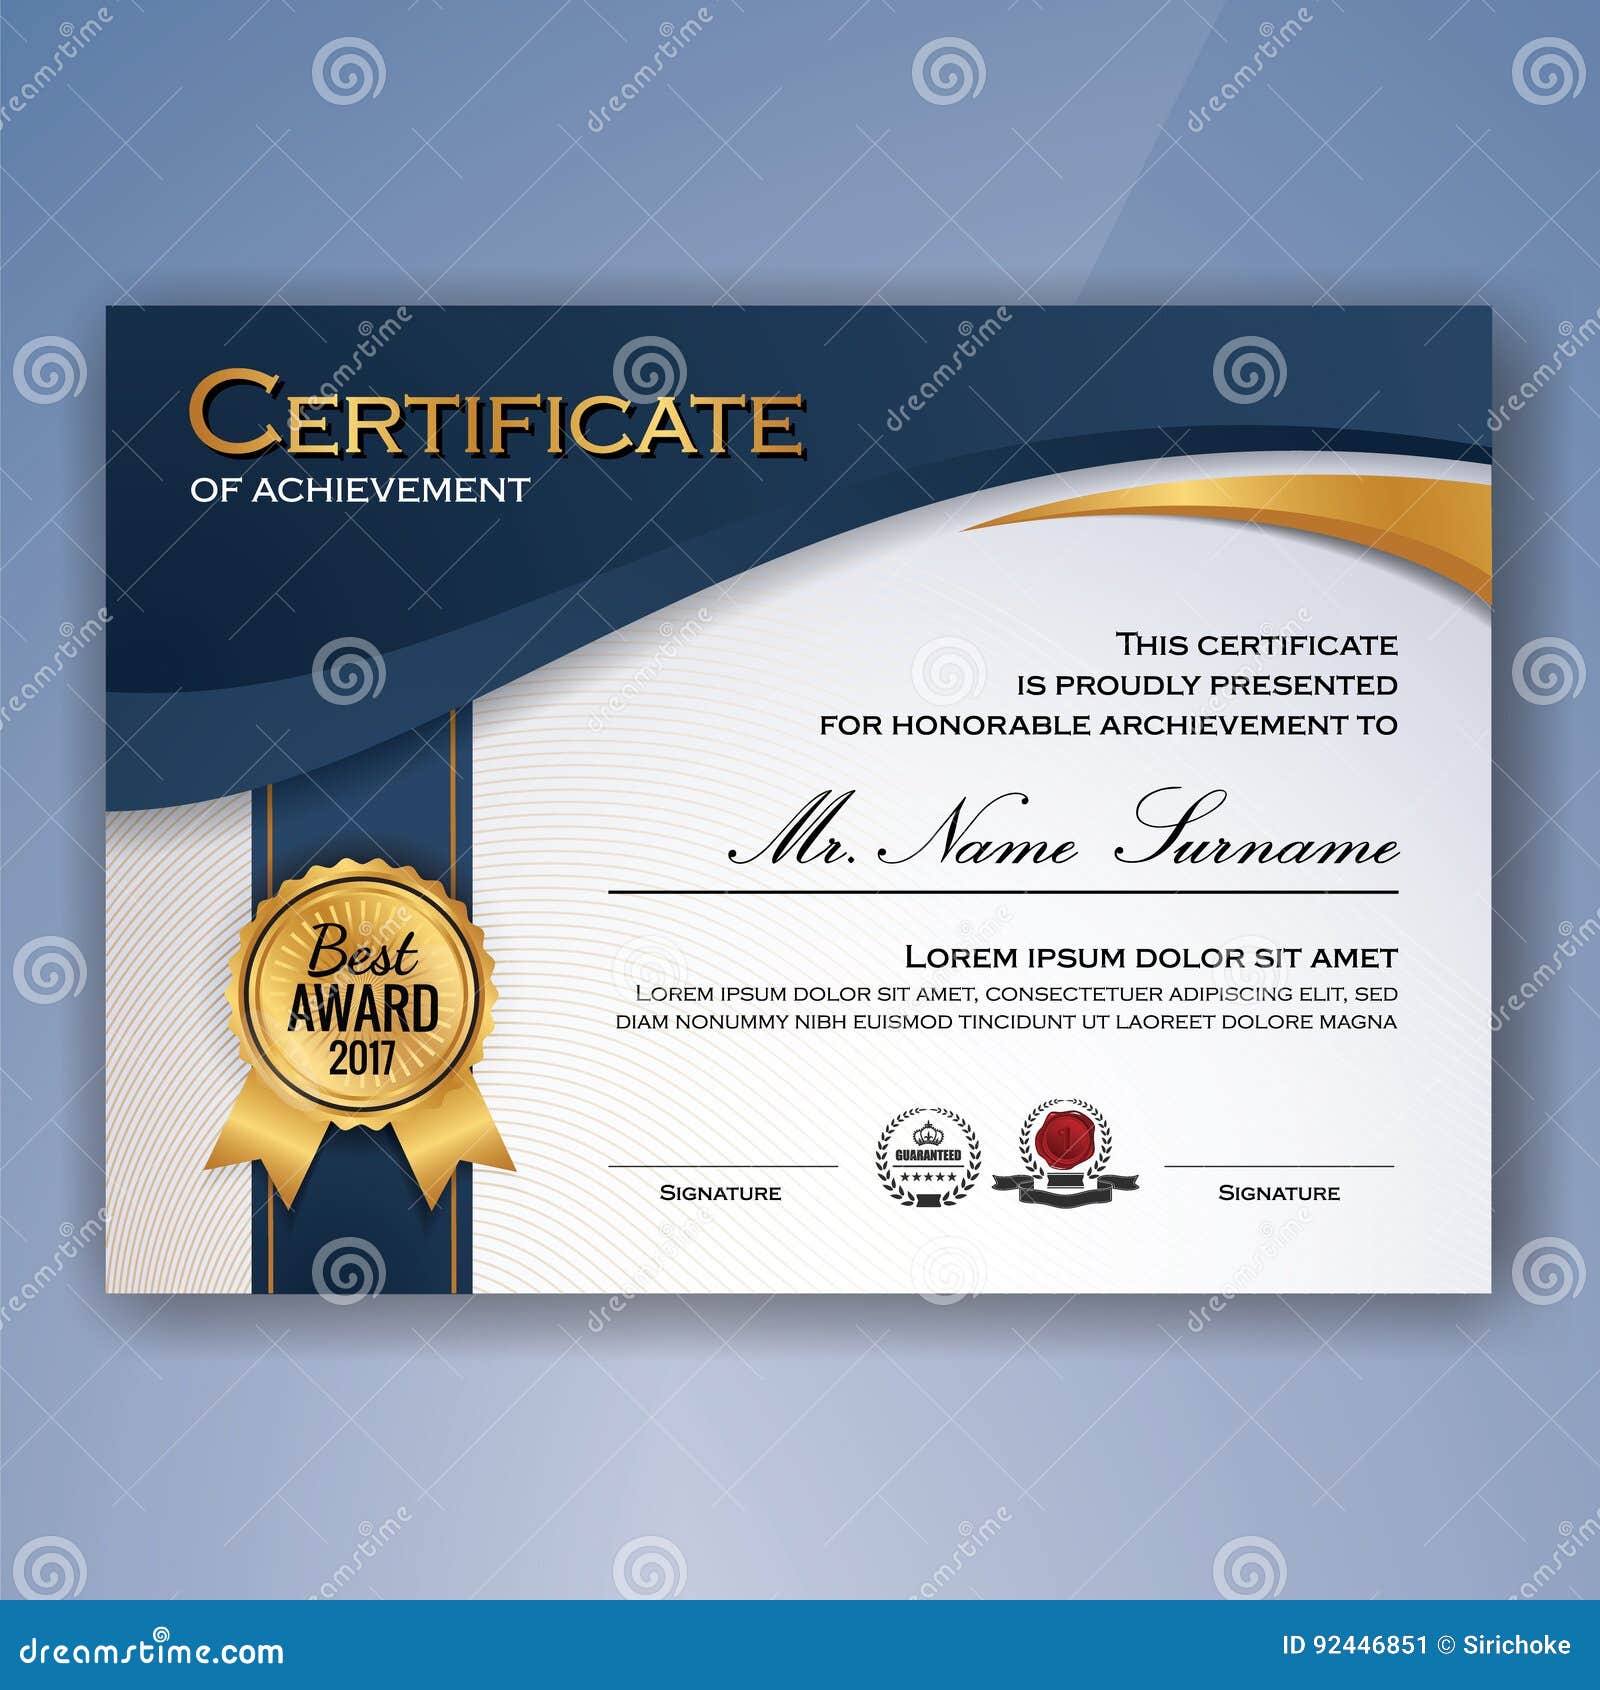 blue and white elegant certificate of achievement